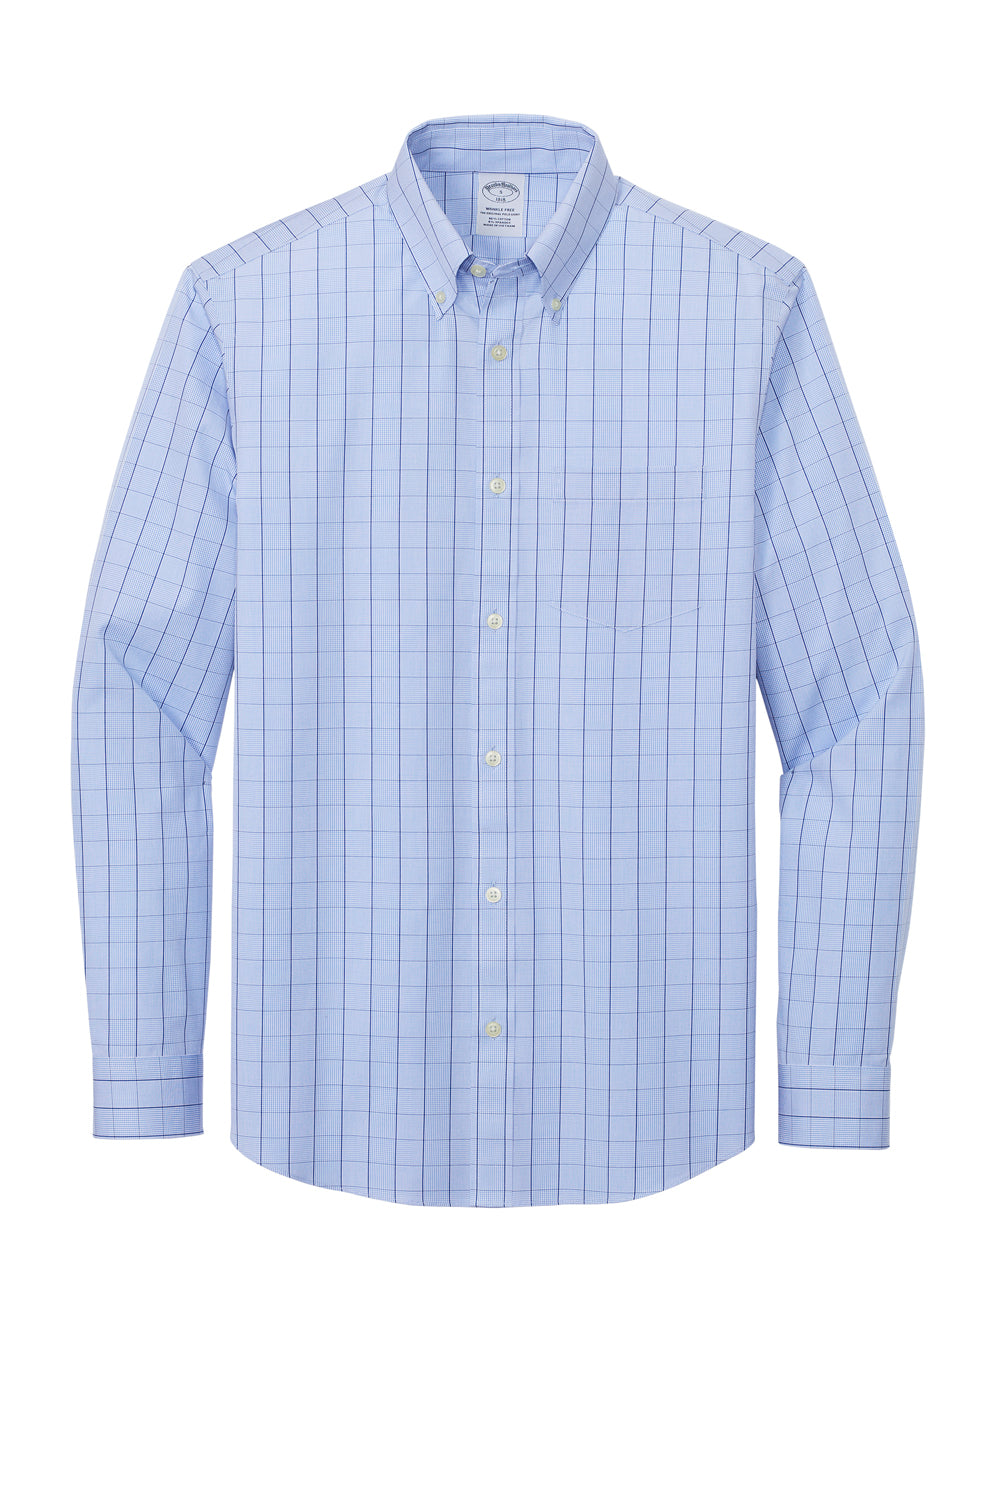 Brooks Brothers Mens Wrinkle Resistant Long Sleeve Button Down Shirt w/ Pocket Newport Blue Flat Front